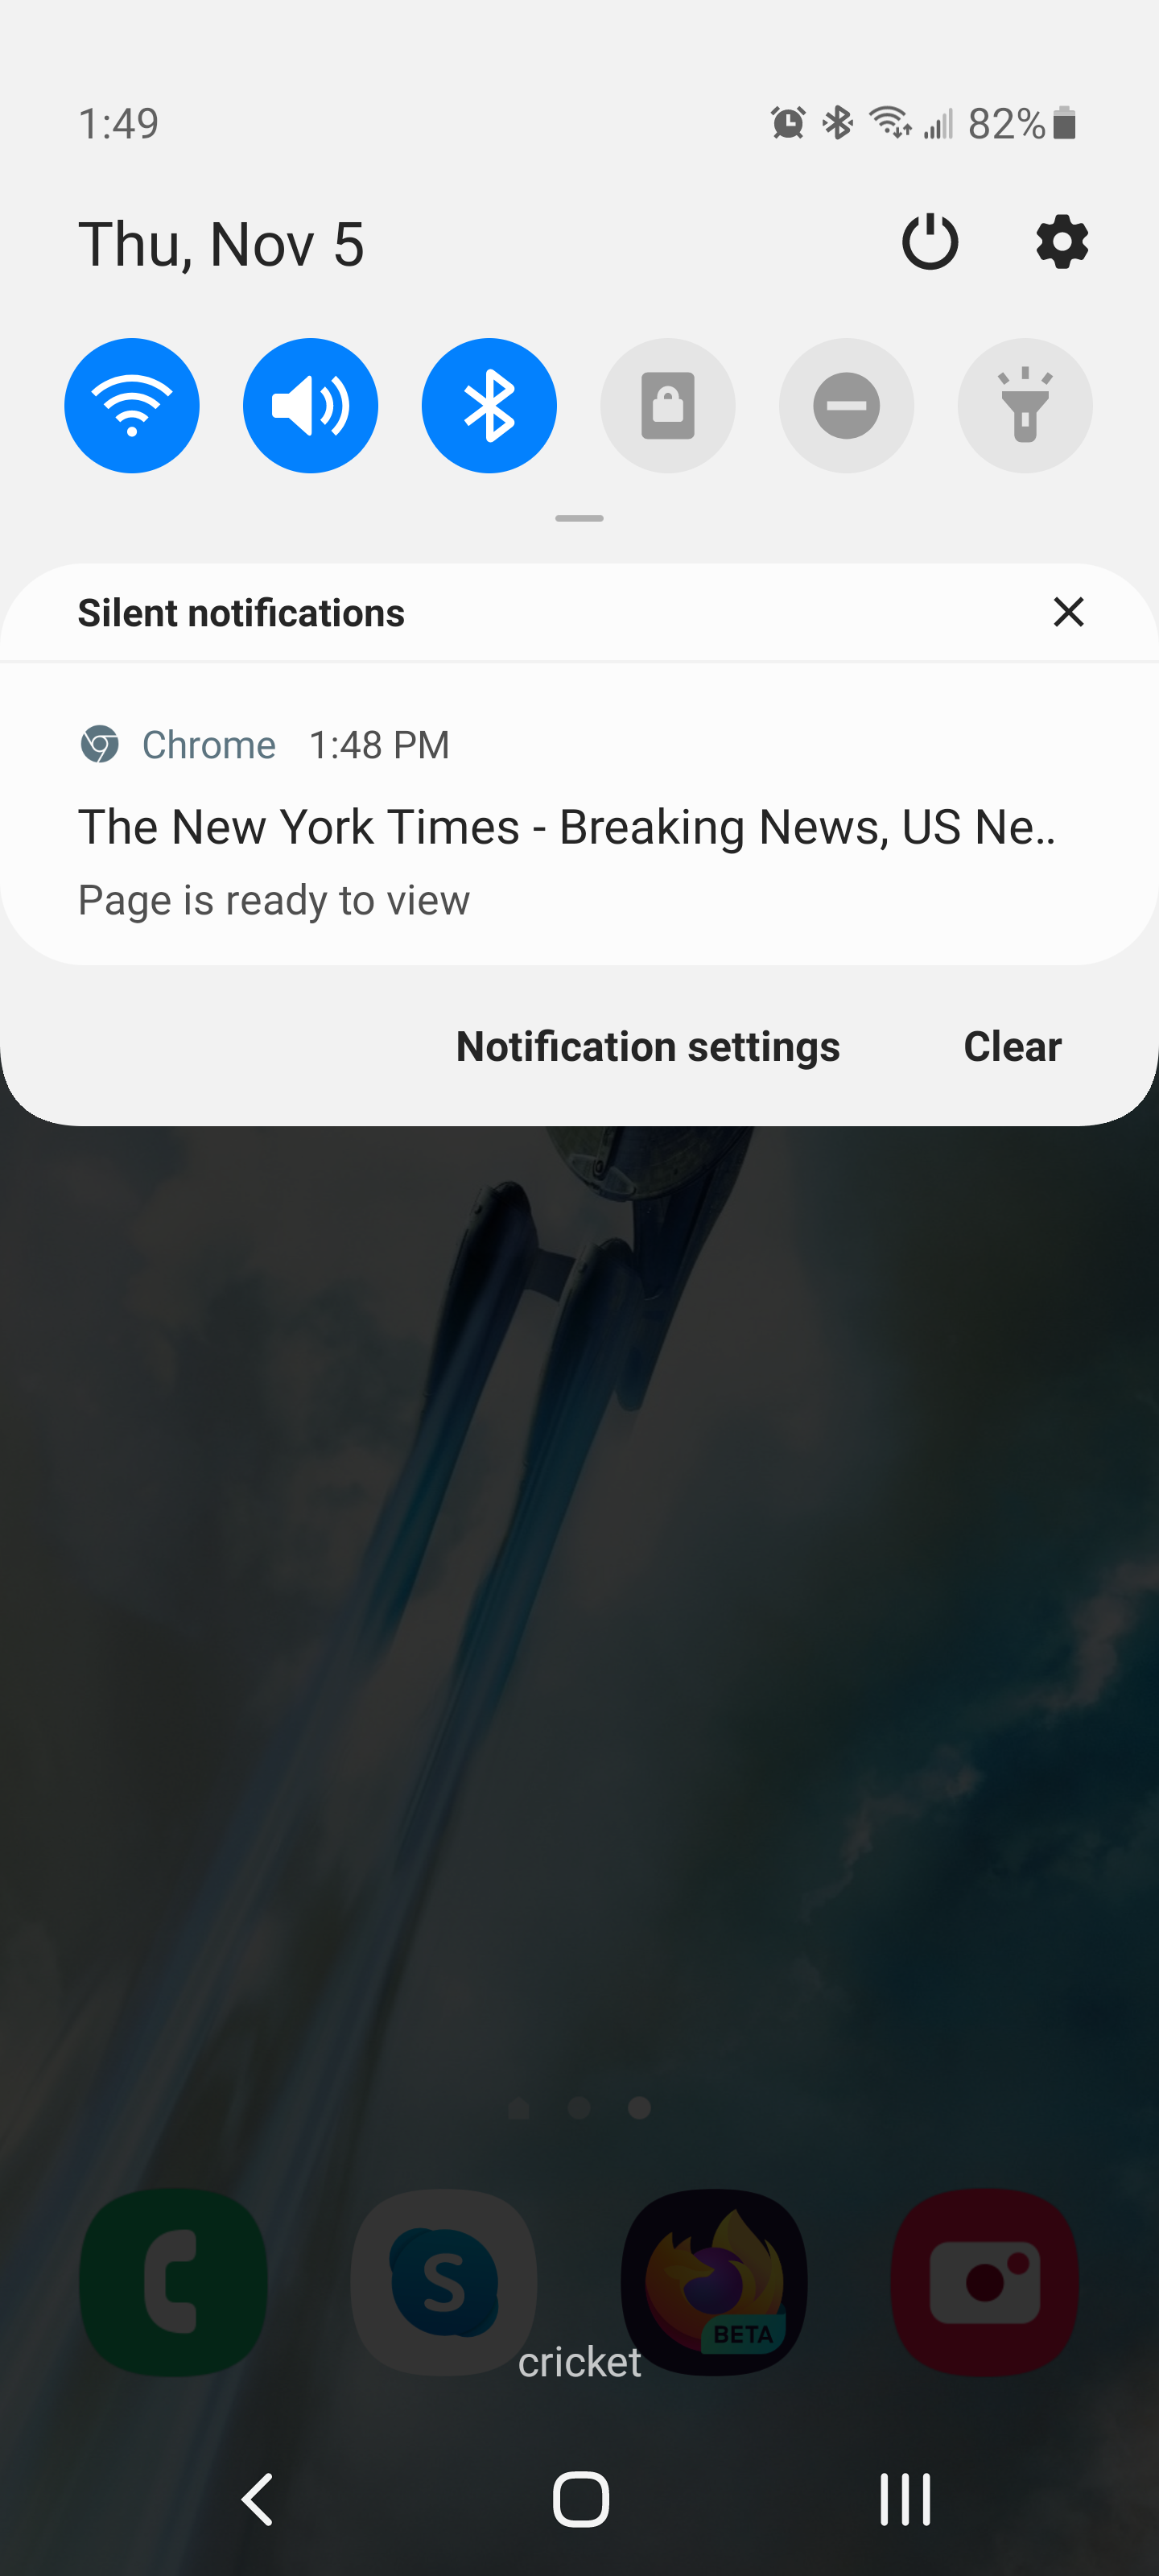 The notification after a page is ready to view on Google Chrome